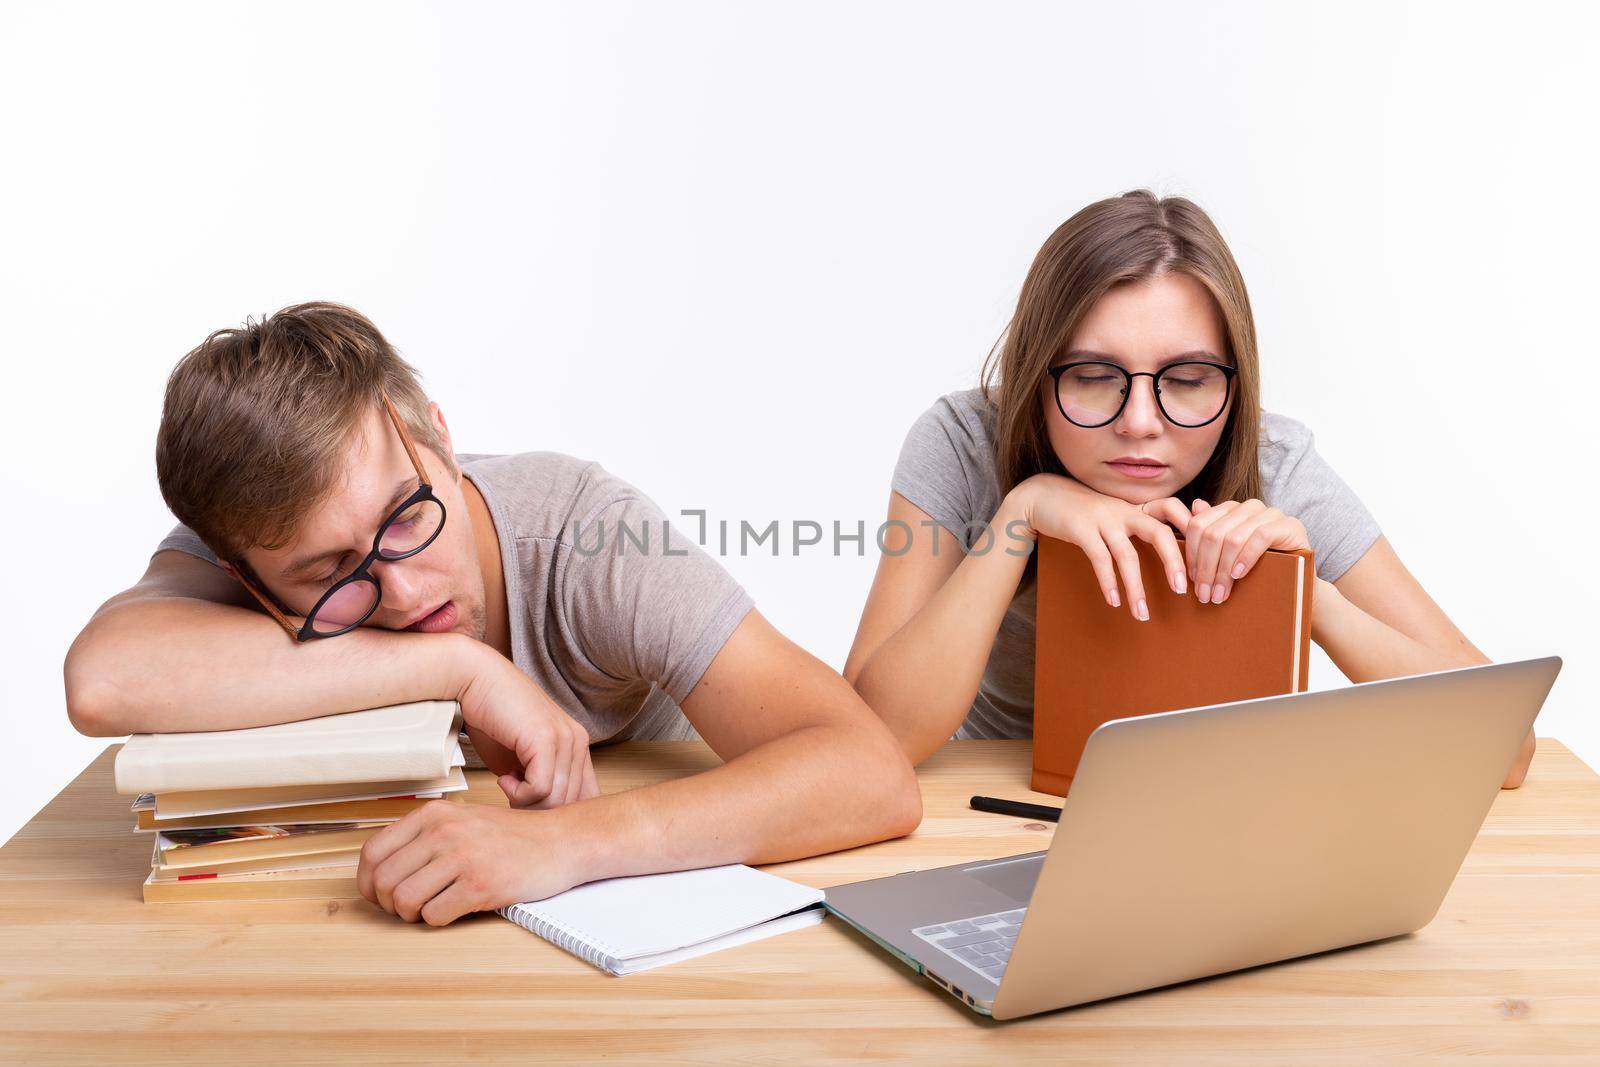 Education, people concept- a couple of young people in glasses look like they are bored of learning homework.